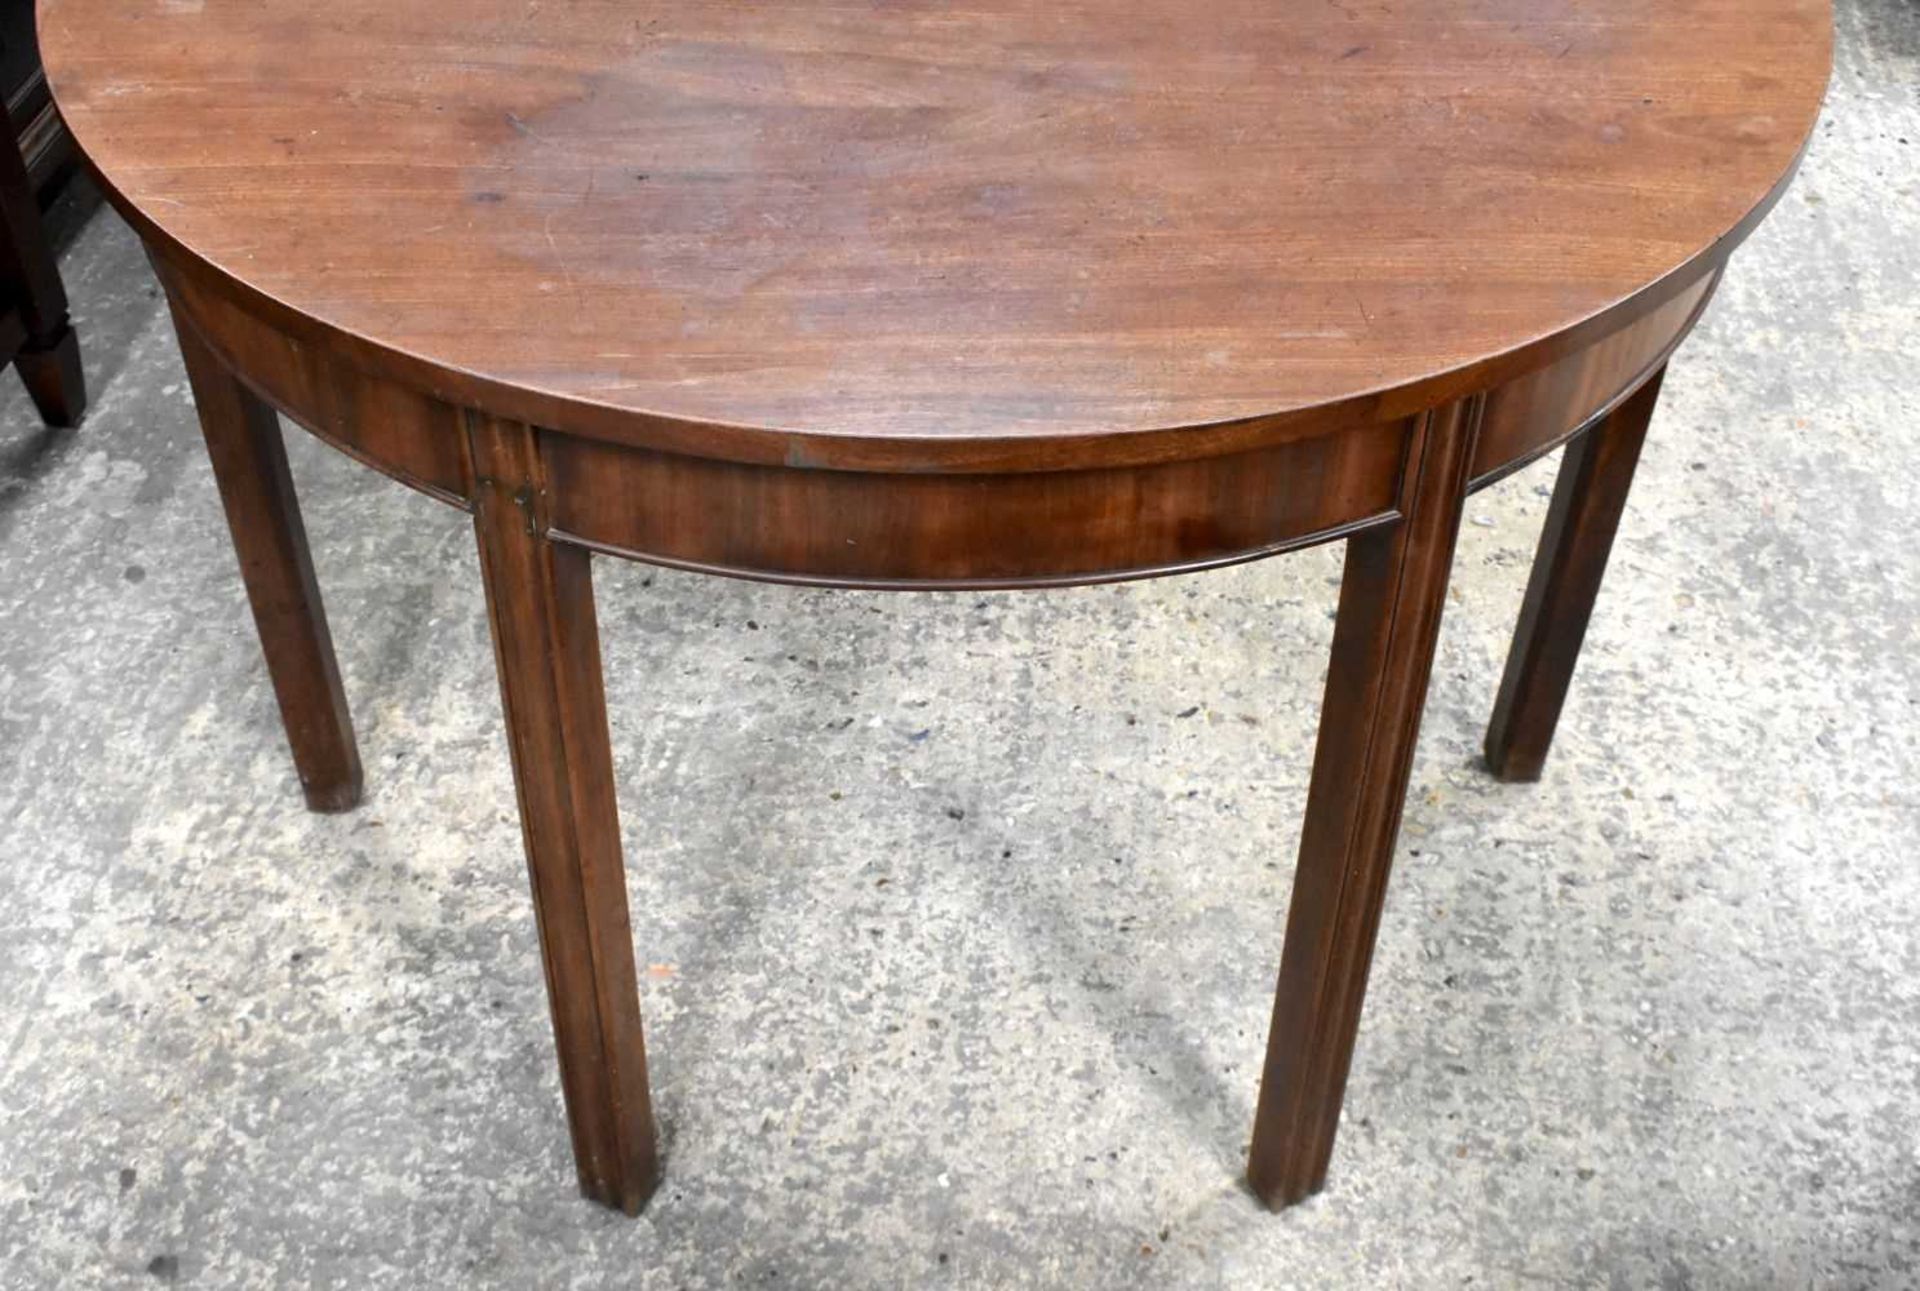 A Mahogany Dining table comprising of a central drop leaf table and two Demilune shaped extensions - Image 8 of 9